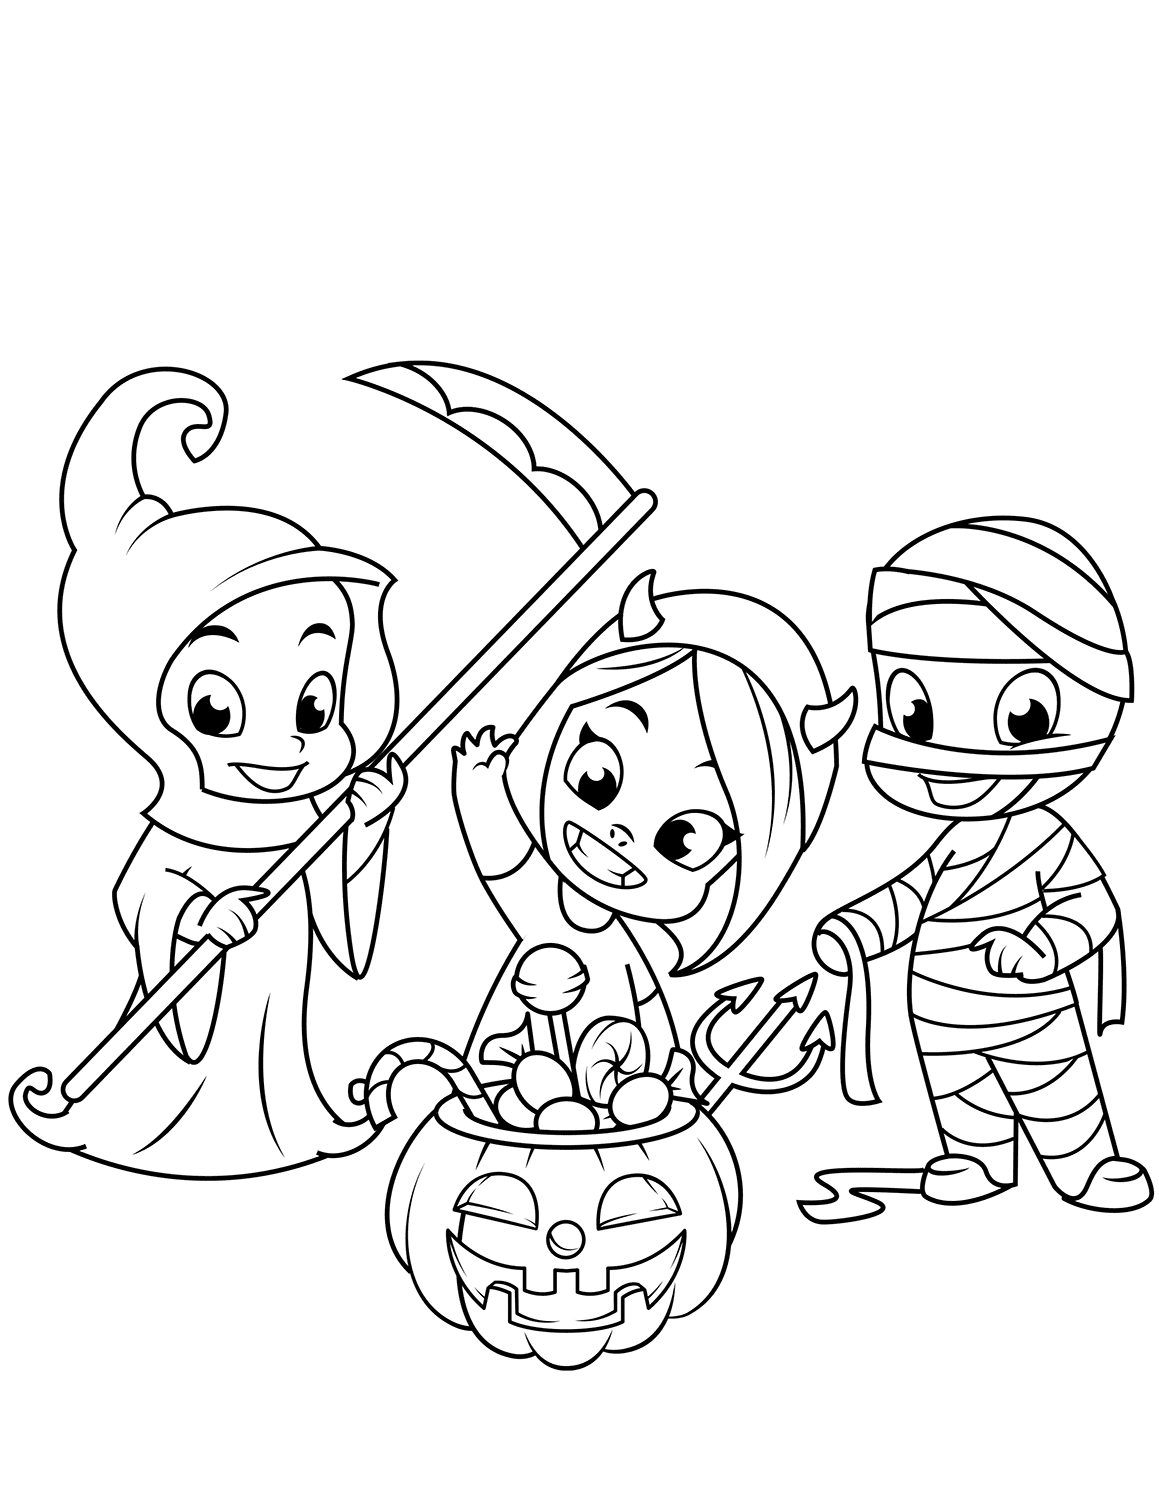 Cute Little Grim Reaper Devil Mummy And A Jack O Lantern With Candies Halloween